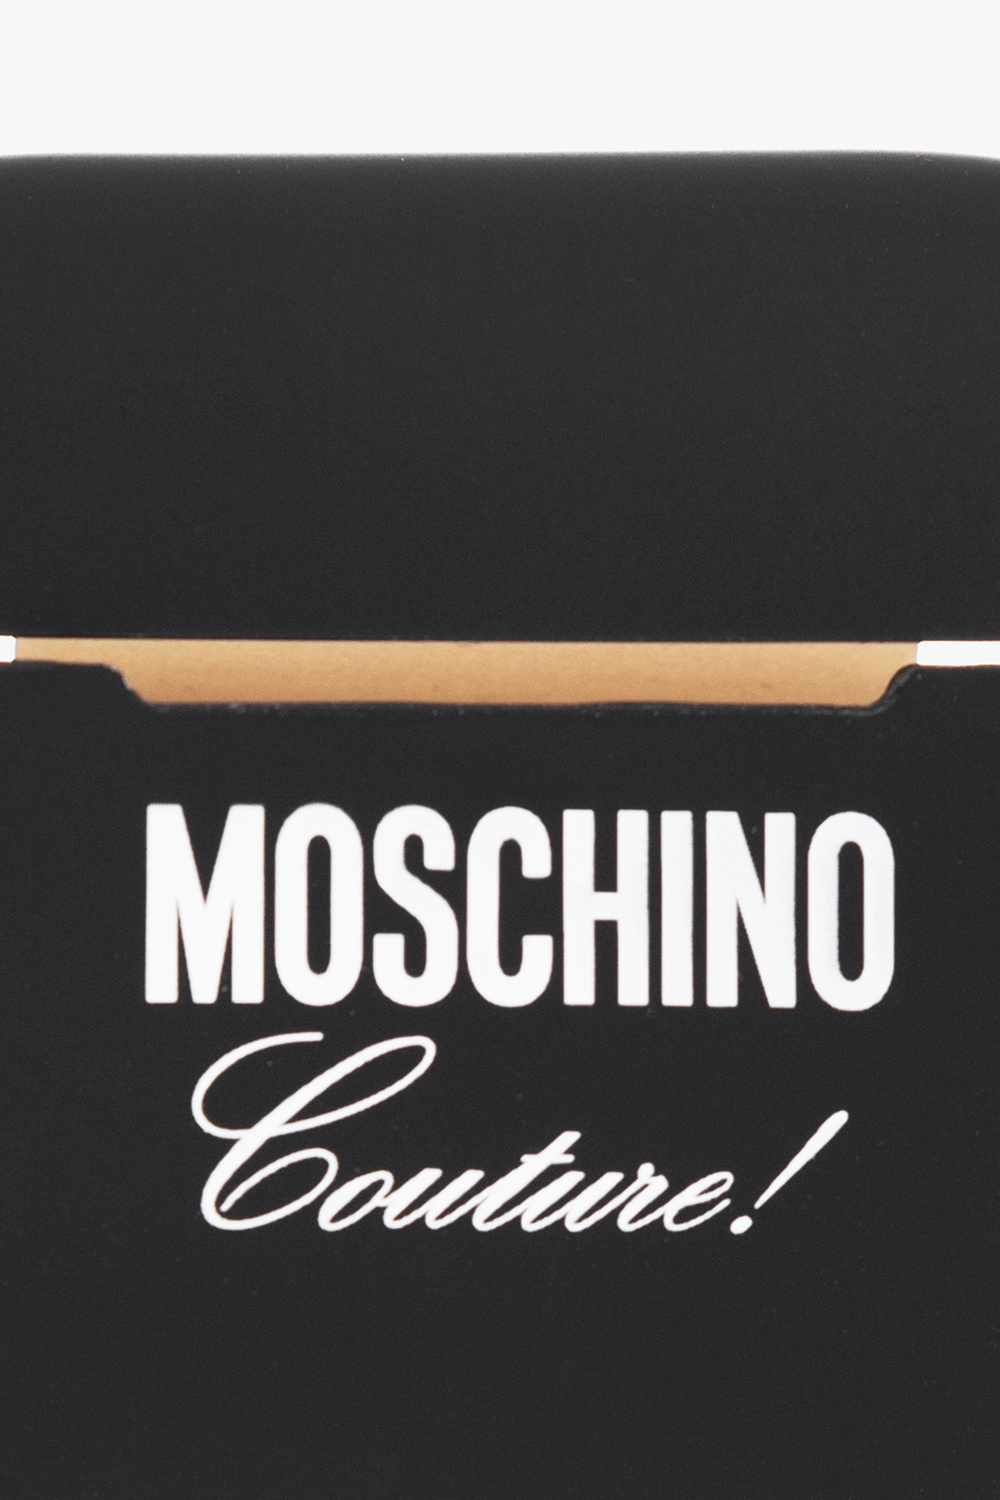 Moschino Discover the collection